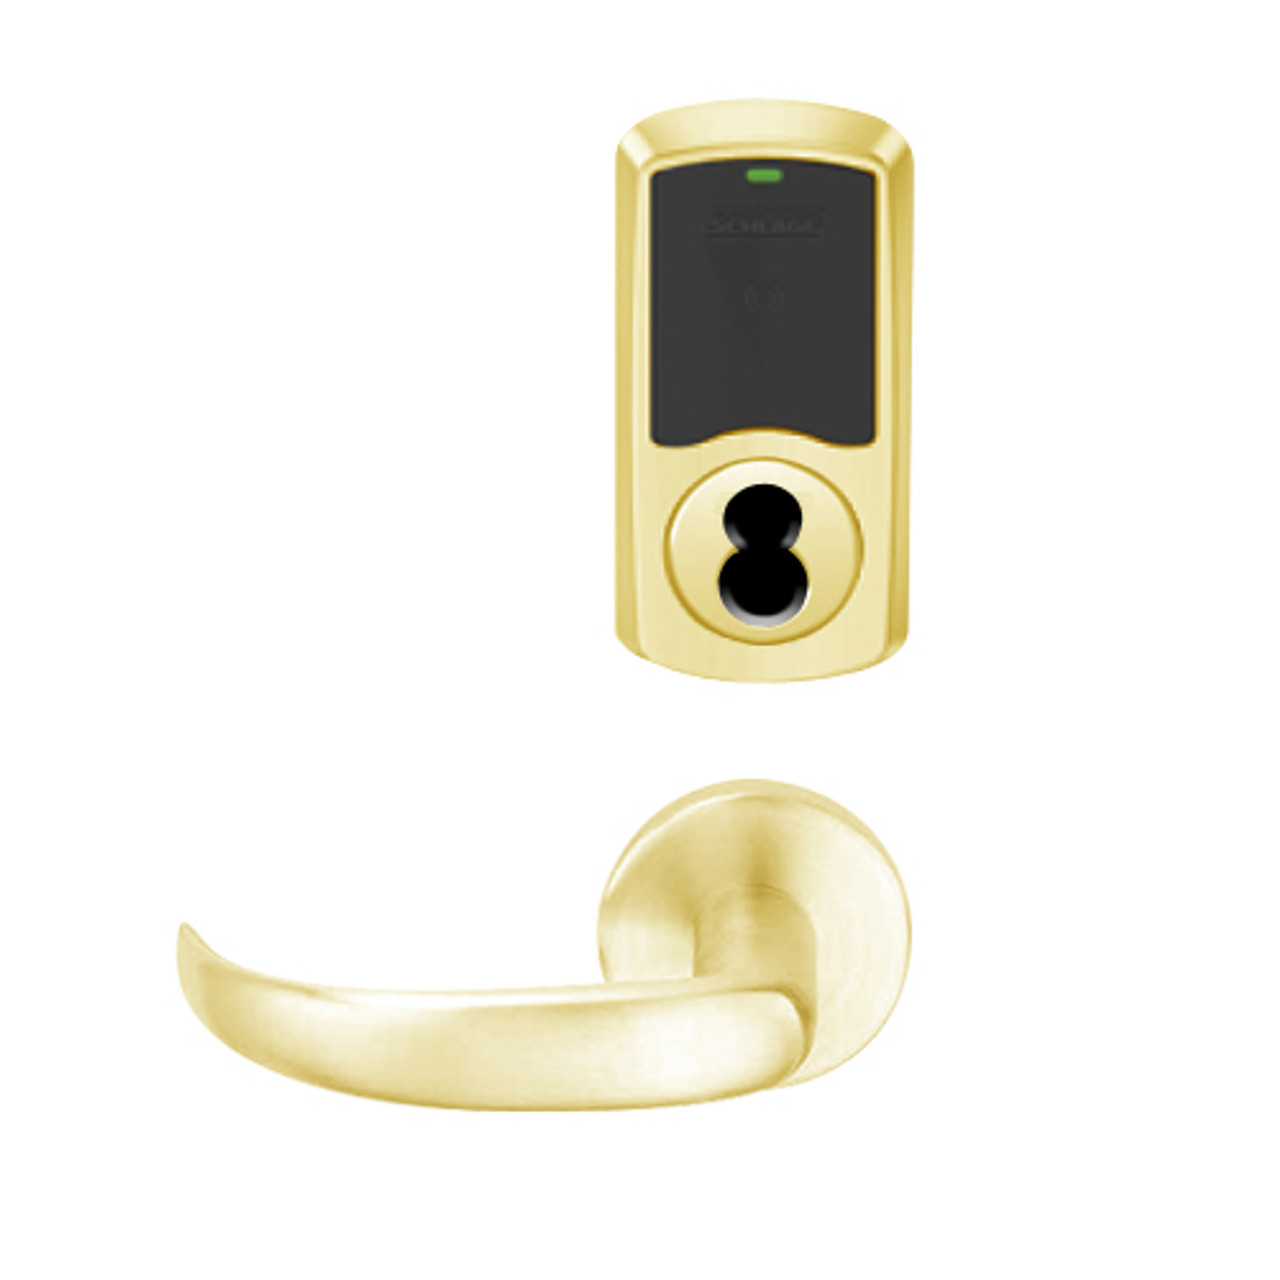 LEMD-GRW-BD-17-605-00A Schlage Privacy/Apartment Wireless Greenwich Mortise Deadbolt Lock with LED and Sparta Lever Prepped for SFIC in Bright Brass